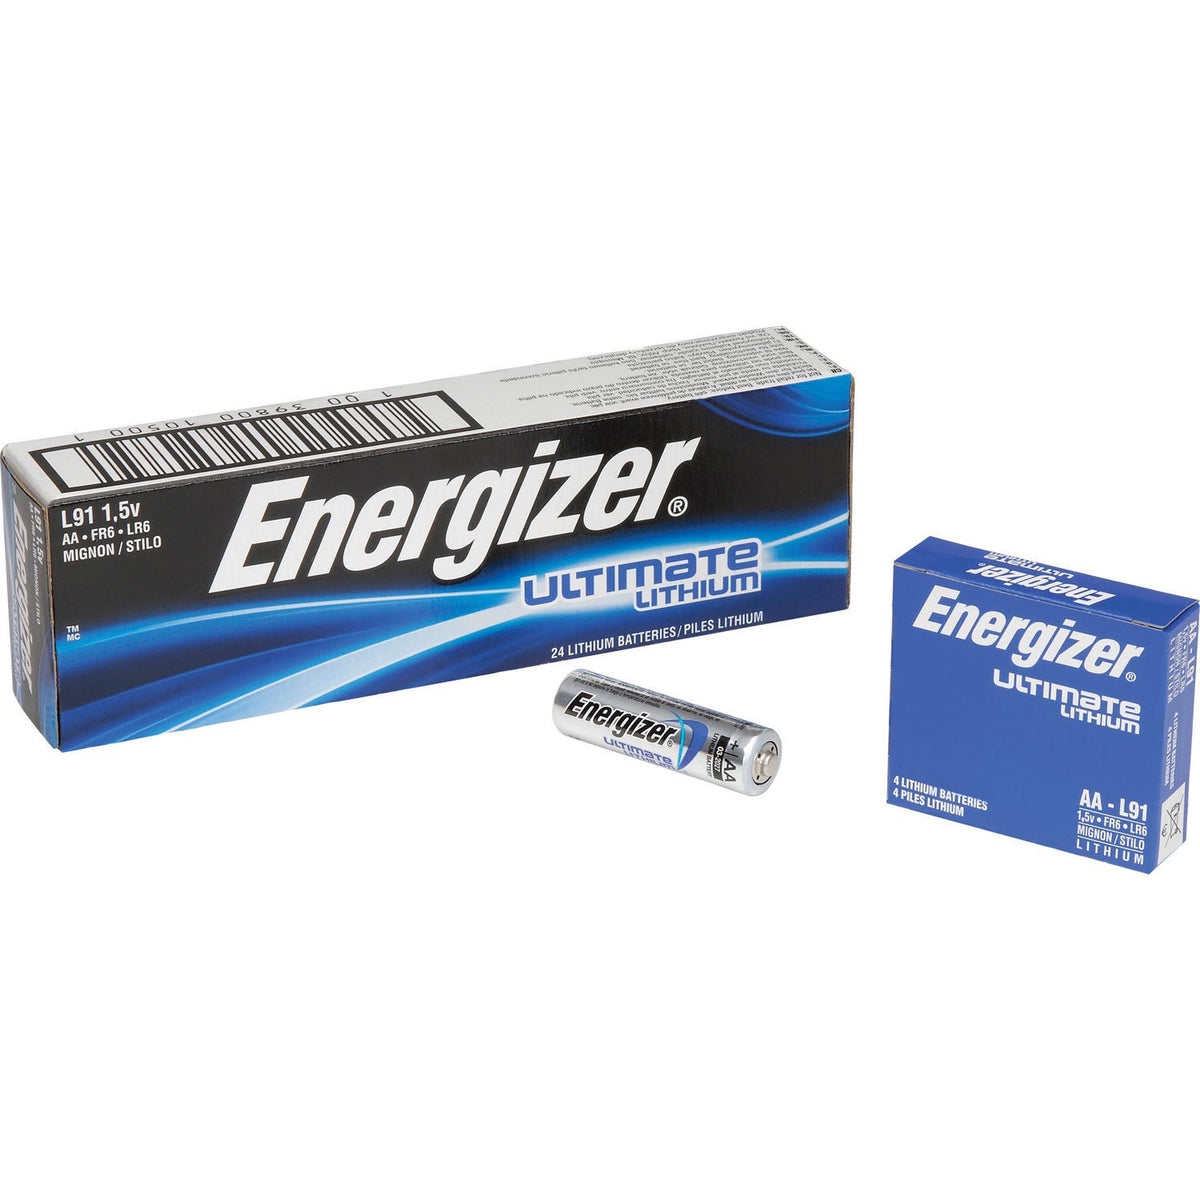 Pack of 24 Energizer AA Ultimate Lithium Batteries, L91BP SEALED (3 x 8  pks) 999993917344